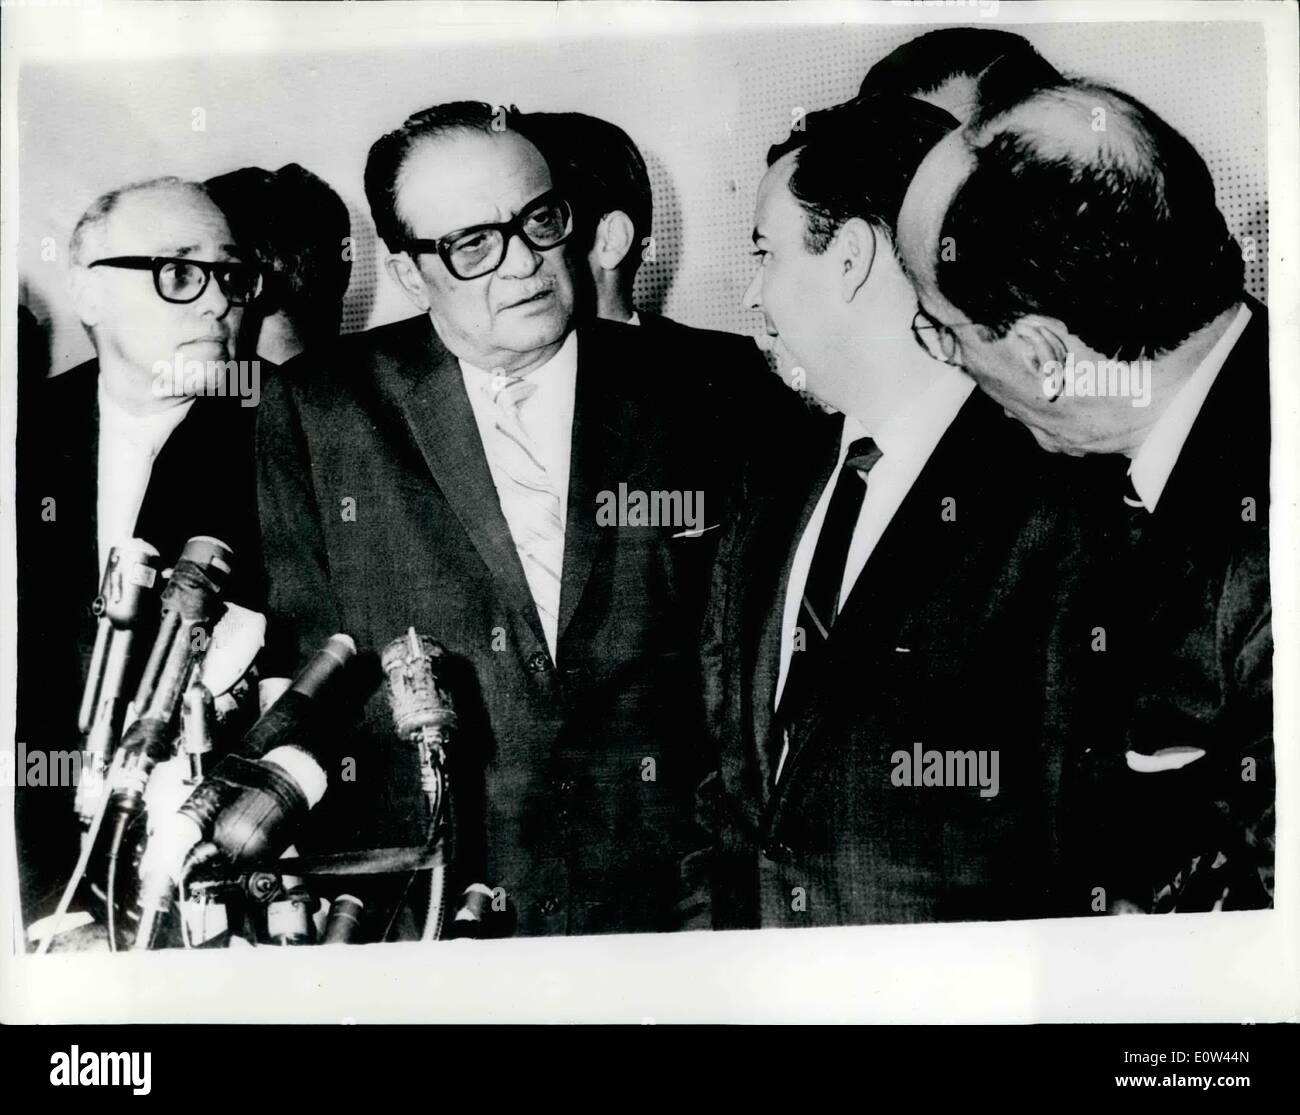 Apr. 04, 1961 - Formation of ''provisional Cuba government'' anti-castroites meet in new york: according to reports from the American broadcasting company - Dr. Jose main cardona is to proclaim a provisional Cuban government Dr. Miro cordons is one of six anti-Castro leaders who met pres, Kennedy pres. Kennedy made it clear that if other nations fail to recognize the peril of communist penetration in Cuba- America will go-it-alone against the Fidel Castro regime Photo shows members of the anti-Castro movement- seen during a meeting in new york recently. They are L-r Stock Photo